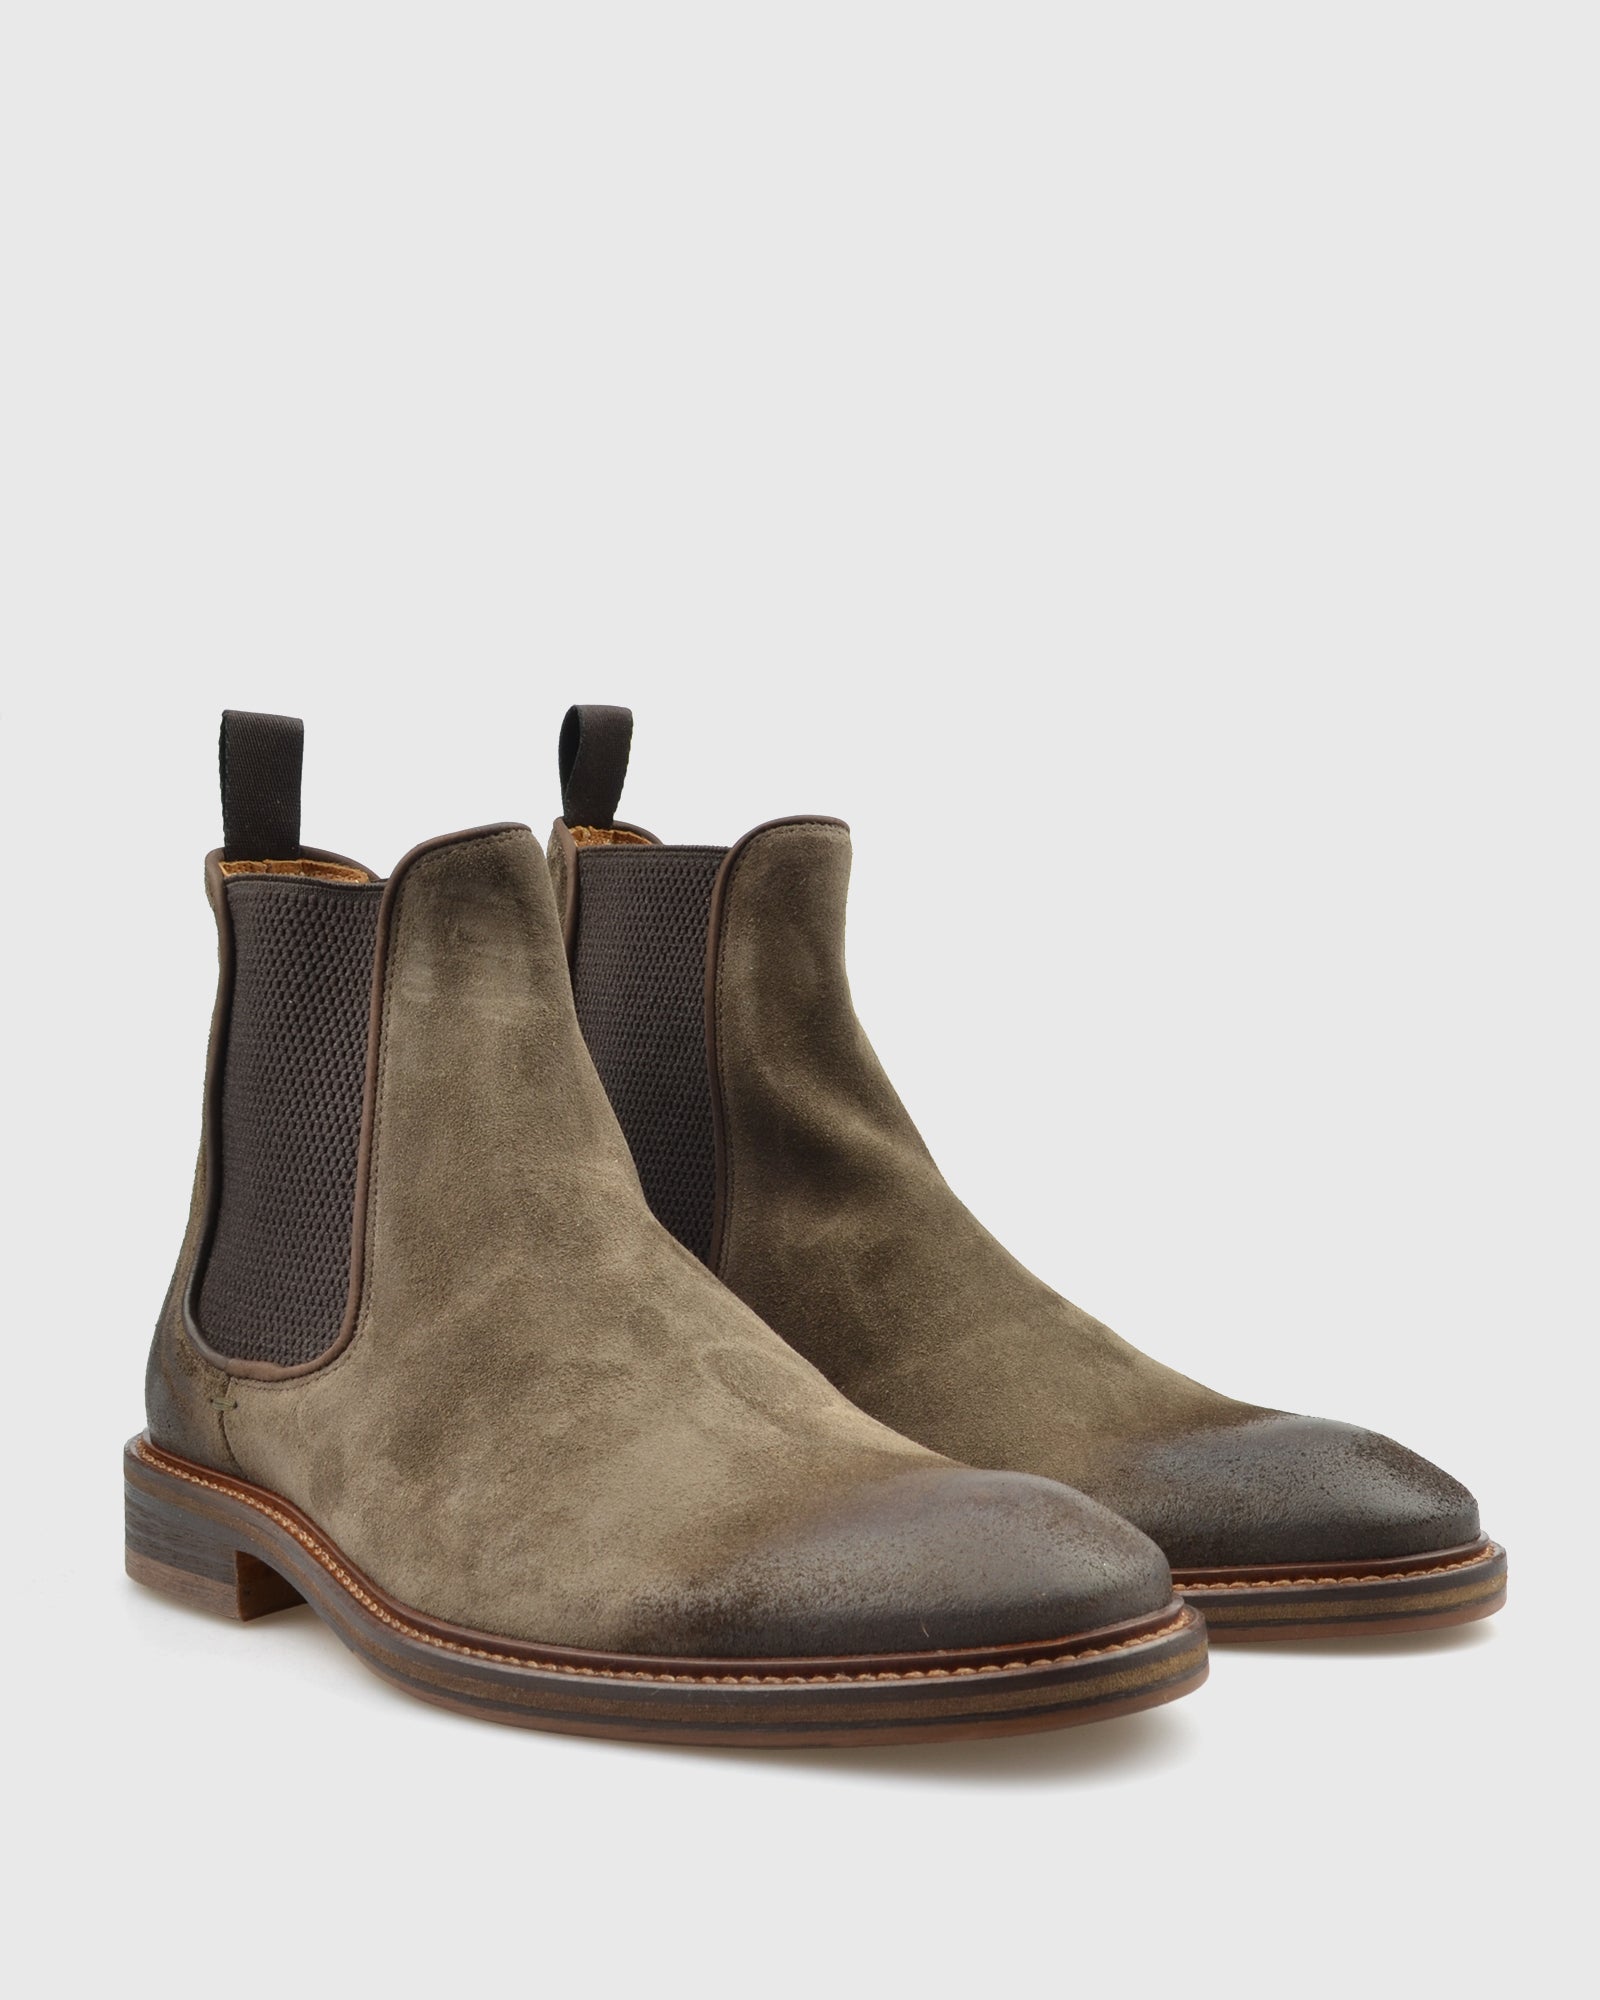 VINCENT & FRANKS VW21VF SUEDE CHLSEA MORO BOOT